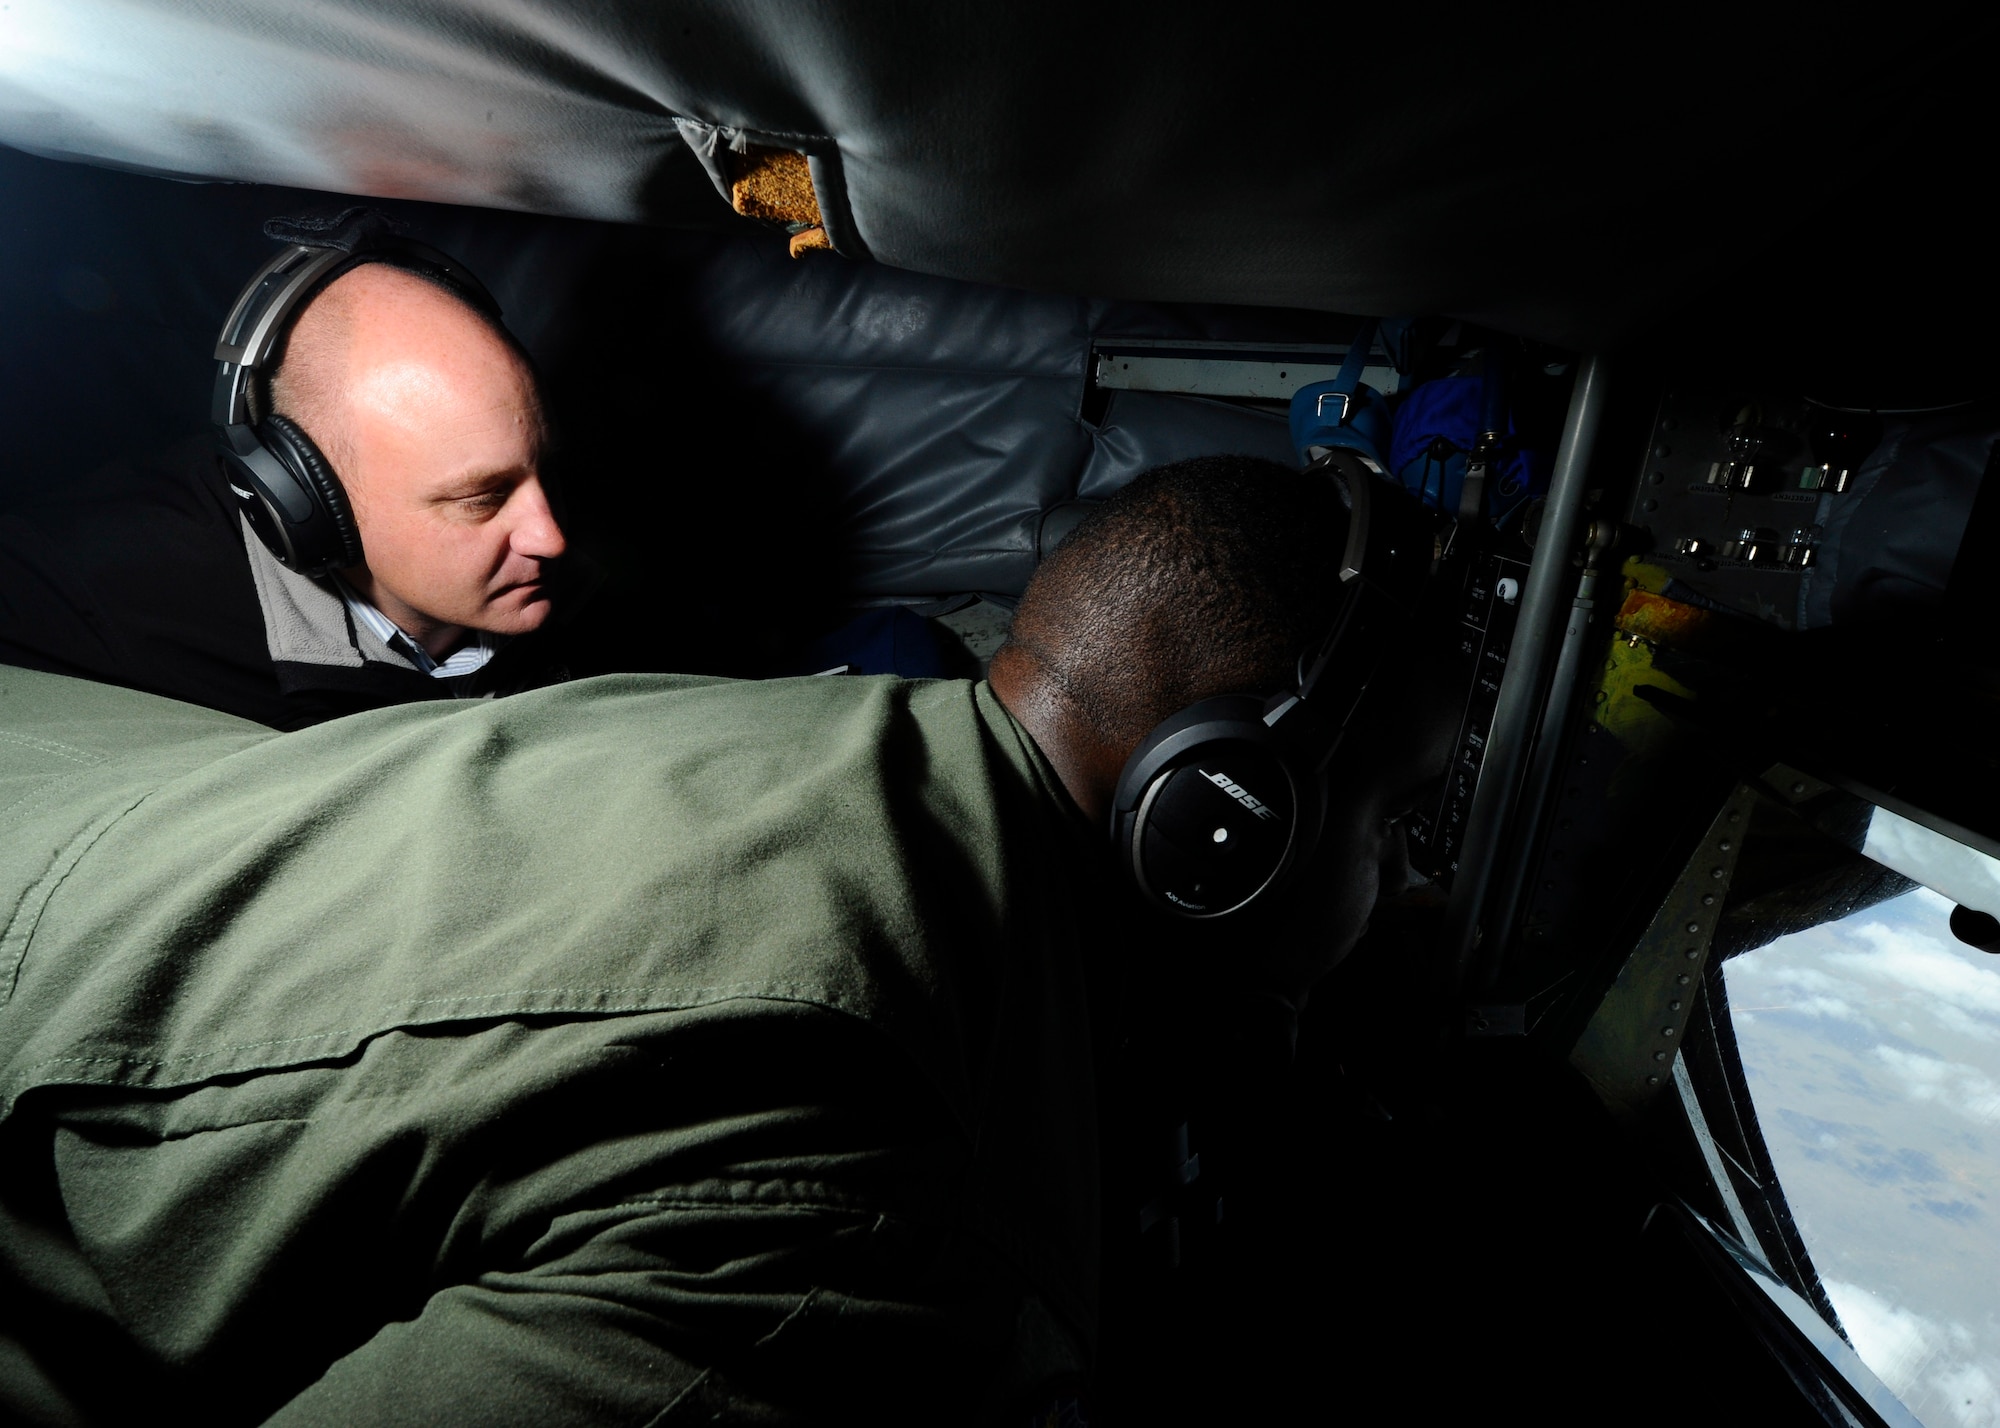 James Havers-Strong, 931st Air Refueling Group honorary commander and The Aviation Business International Group of Companies CEO and managing director, watches as Staff Sgt. Malcom Lee, 22nd Operations Support Squadron operational support training NCO in charge, refuels a B-52 Stratofortress, April 23, 2015, over New Mexico. Havers-Strong was one of 15 local civic leaders on the flight who witnessed the 22nd Air Refueling Wing and 931st Air Refueling Group mission first-hand. (U.S. Air Force photo by Senior Airman Victor J. Caputo)